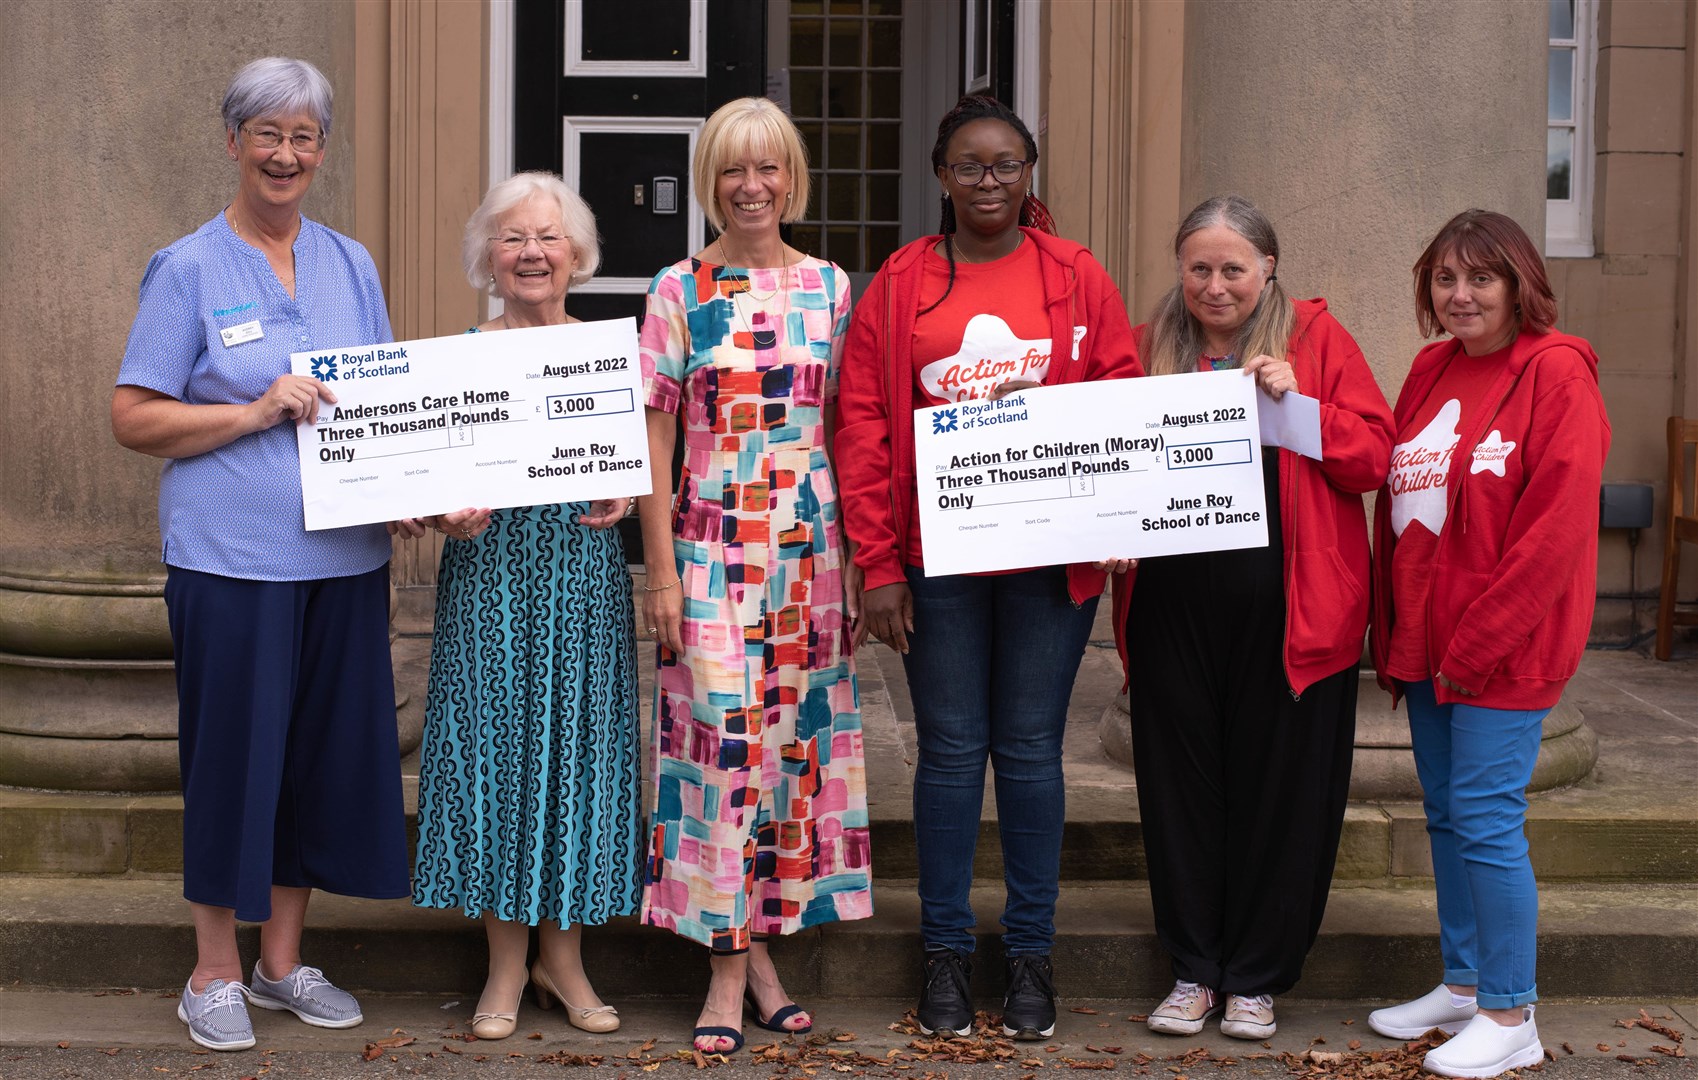 June Roy's School of Dance presented the donations to their two chosen local charities.